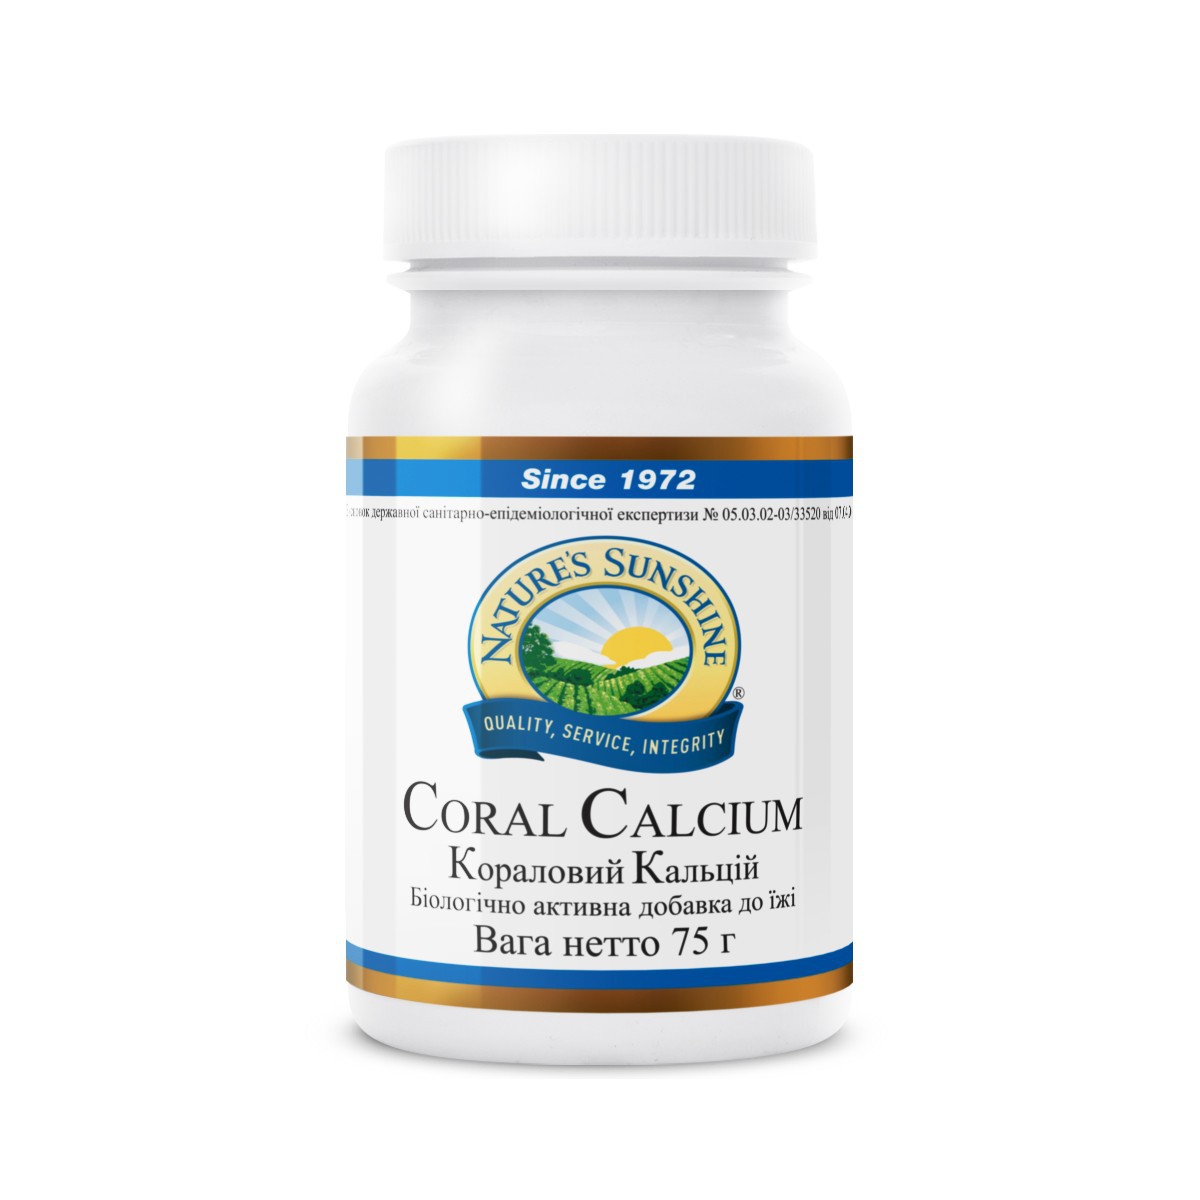 Coral Calcium - Коралловый Кальций - БАД Nature's Sunshine Products (NSP)